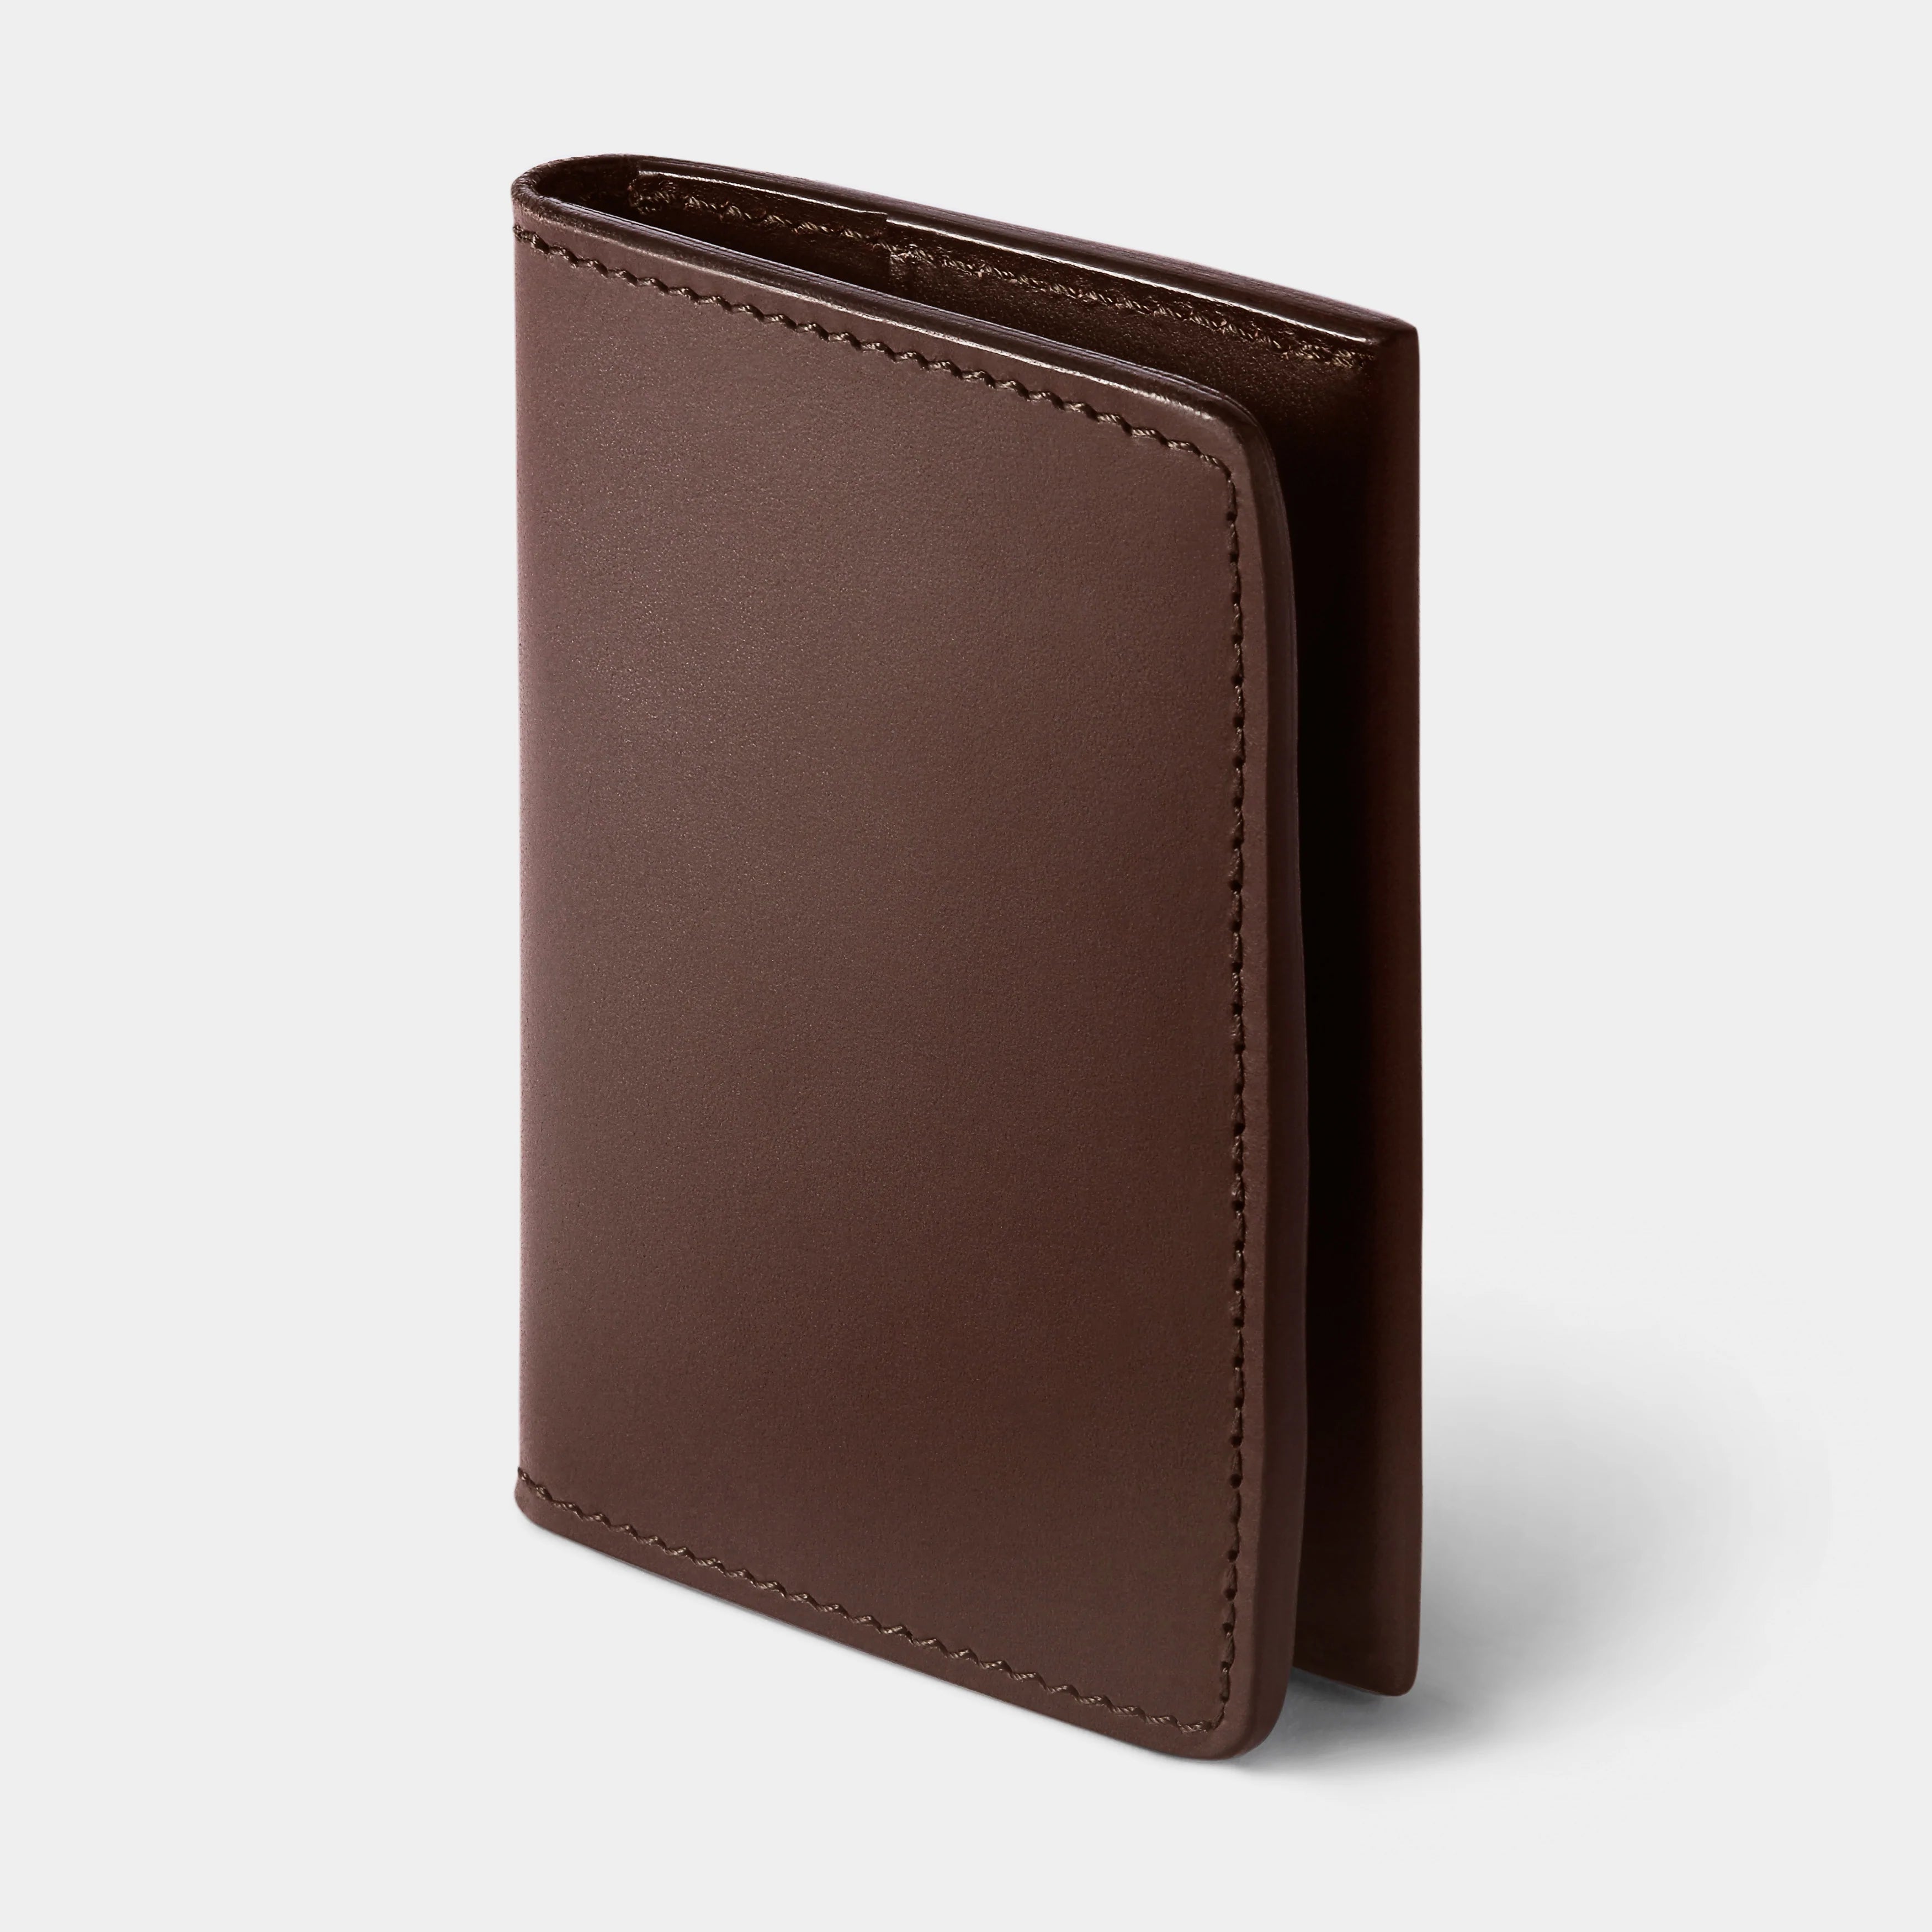 Swanfield - Return Chocolate Leather card wallet - Good Conditions